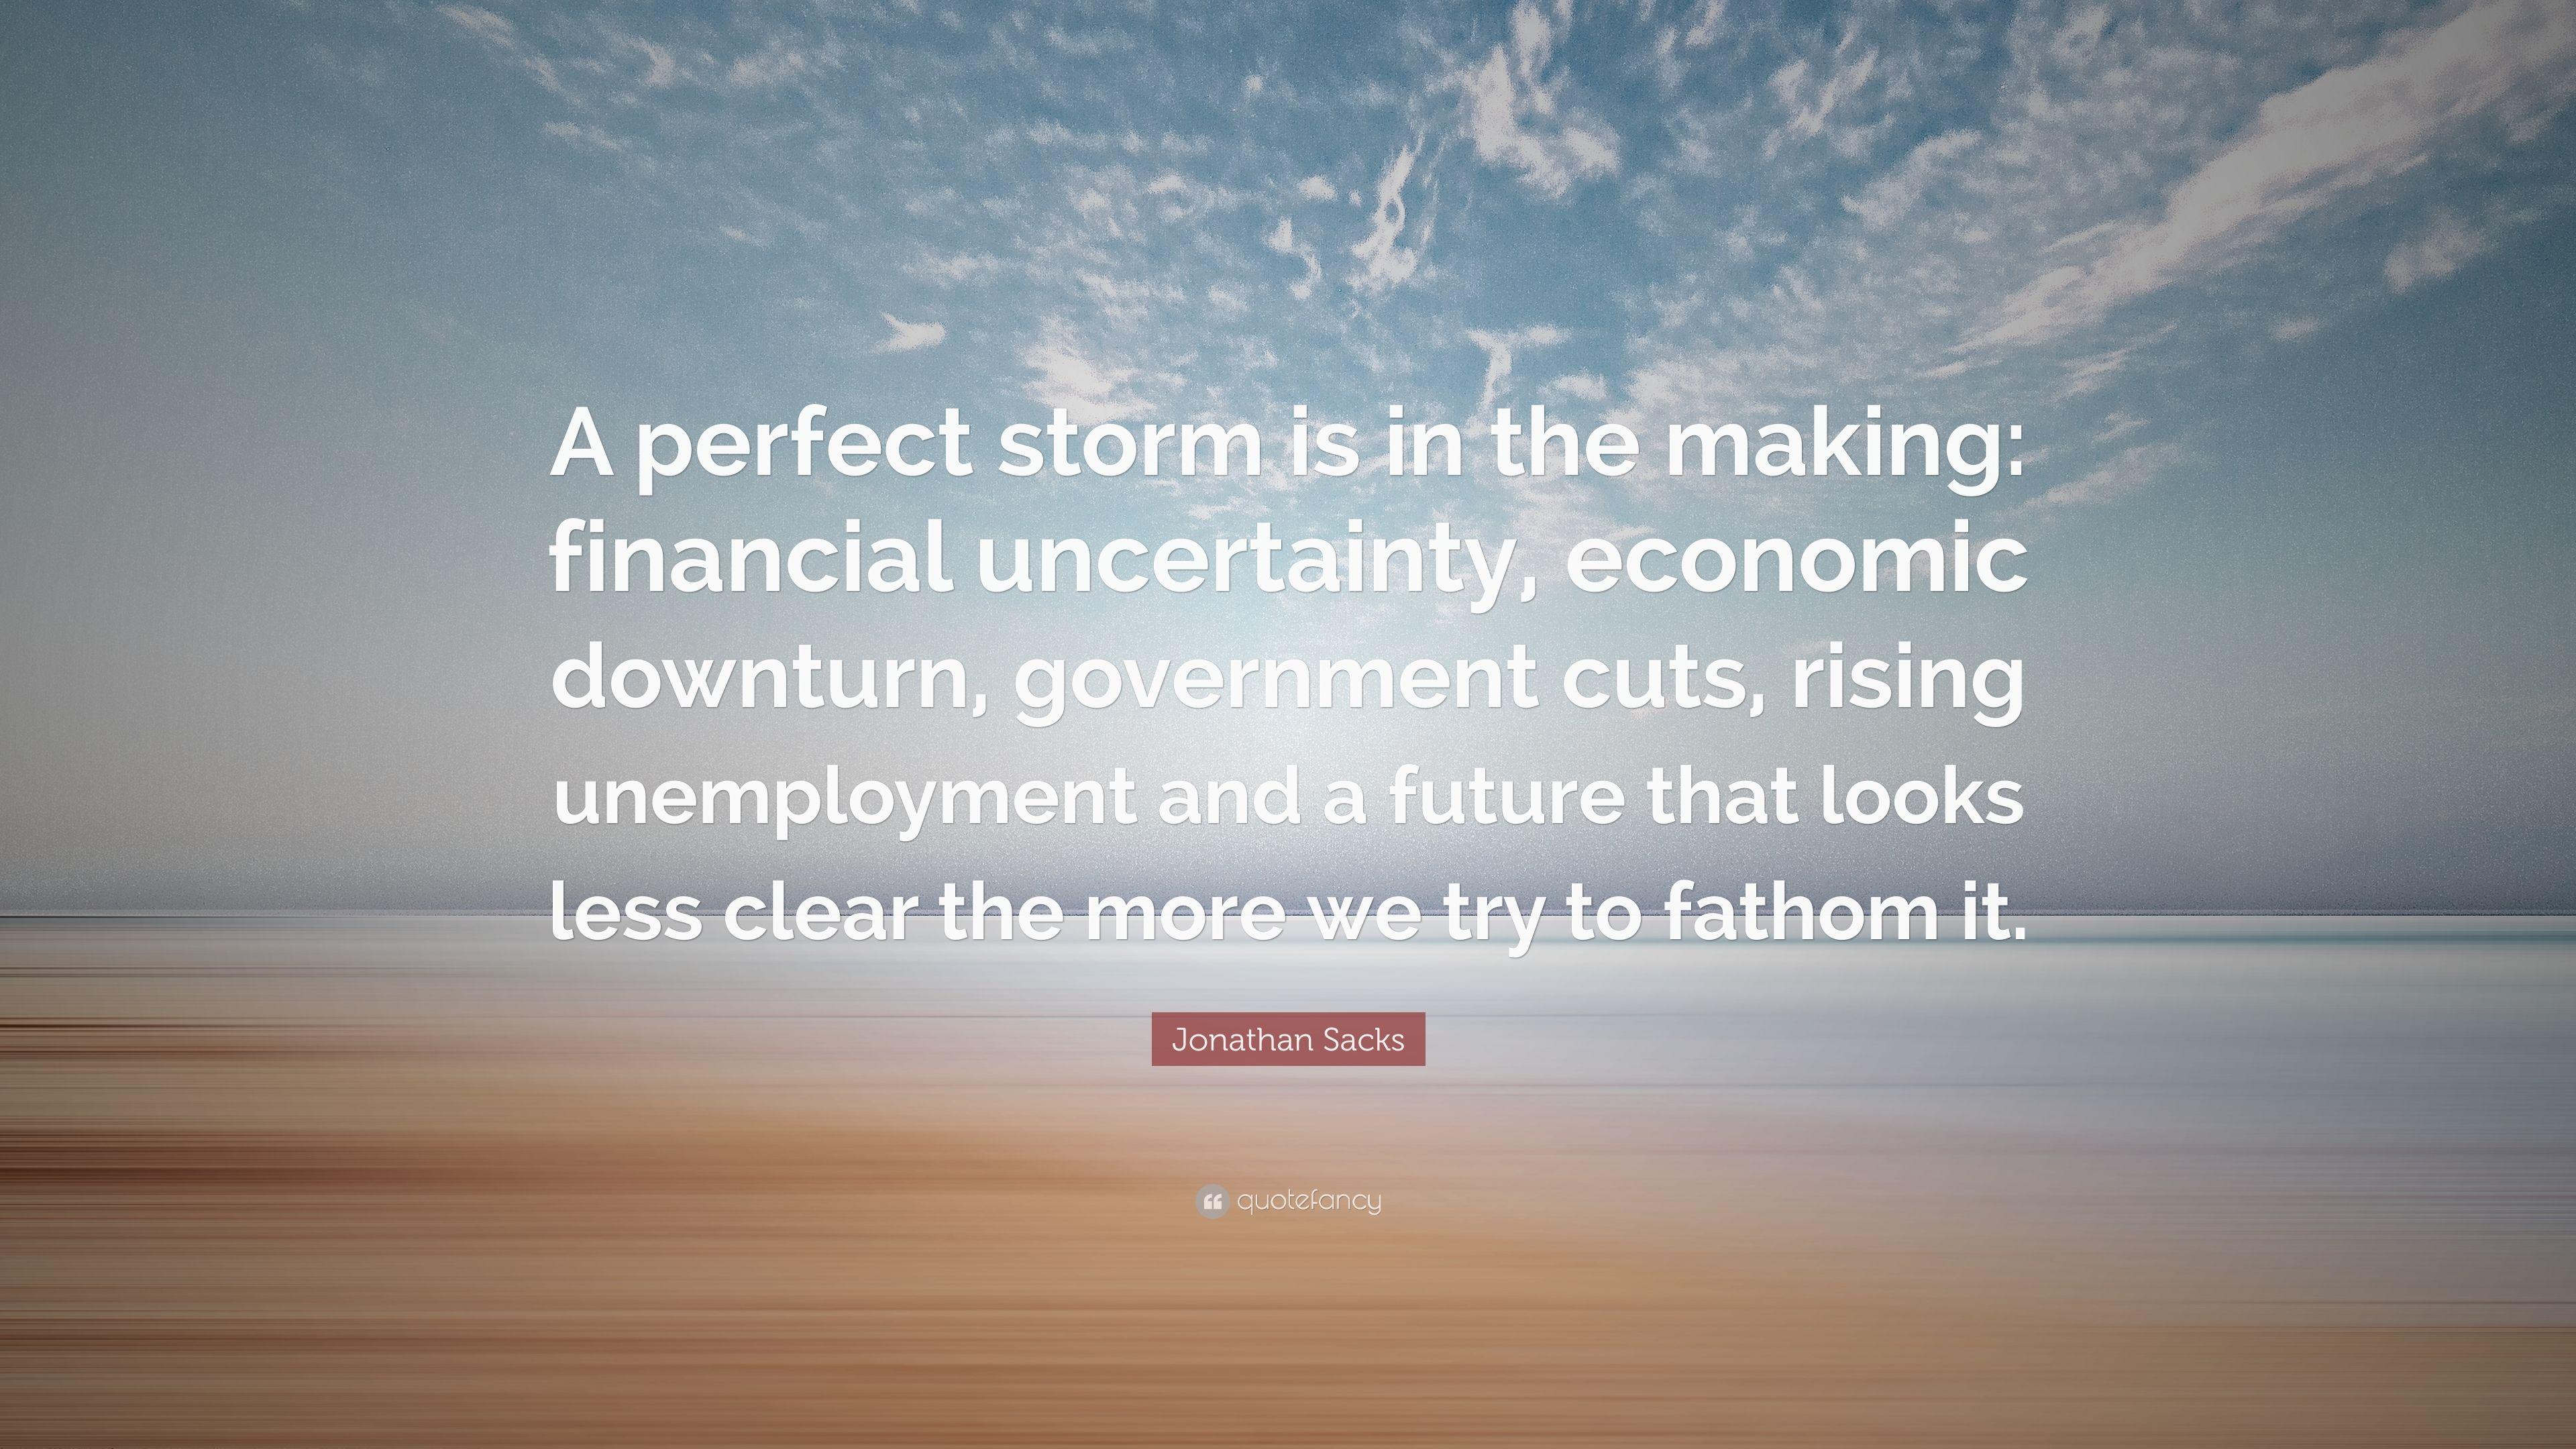 Jonathan Sacks Quote: “A perfect storm is in the making